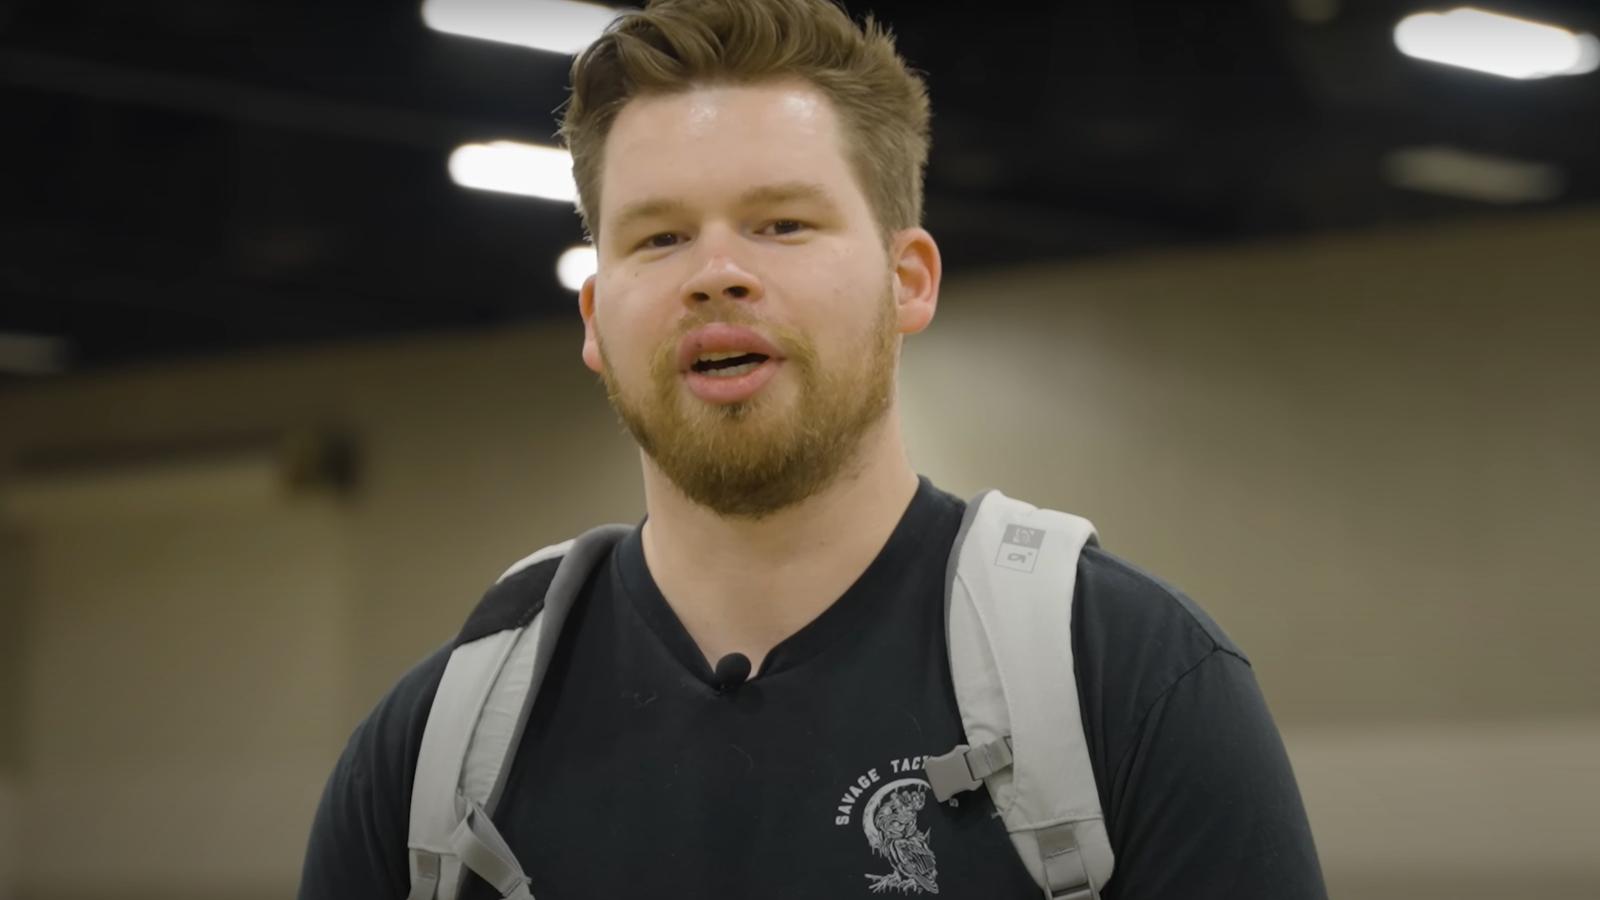 Crimsix speaks out on Call of Duty GOAT debate: “It's not that serious” -  Dexerto